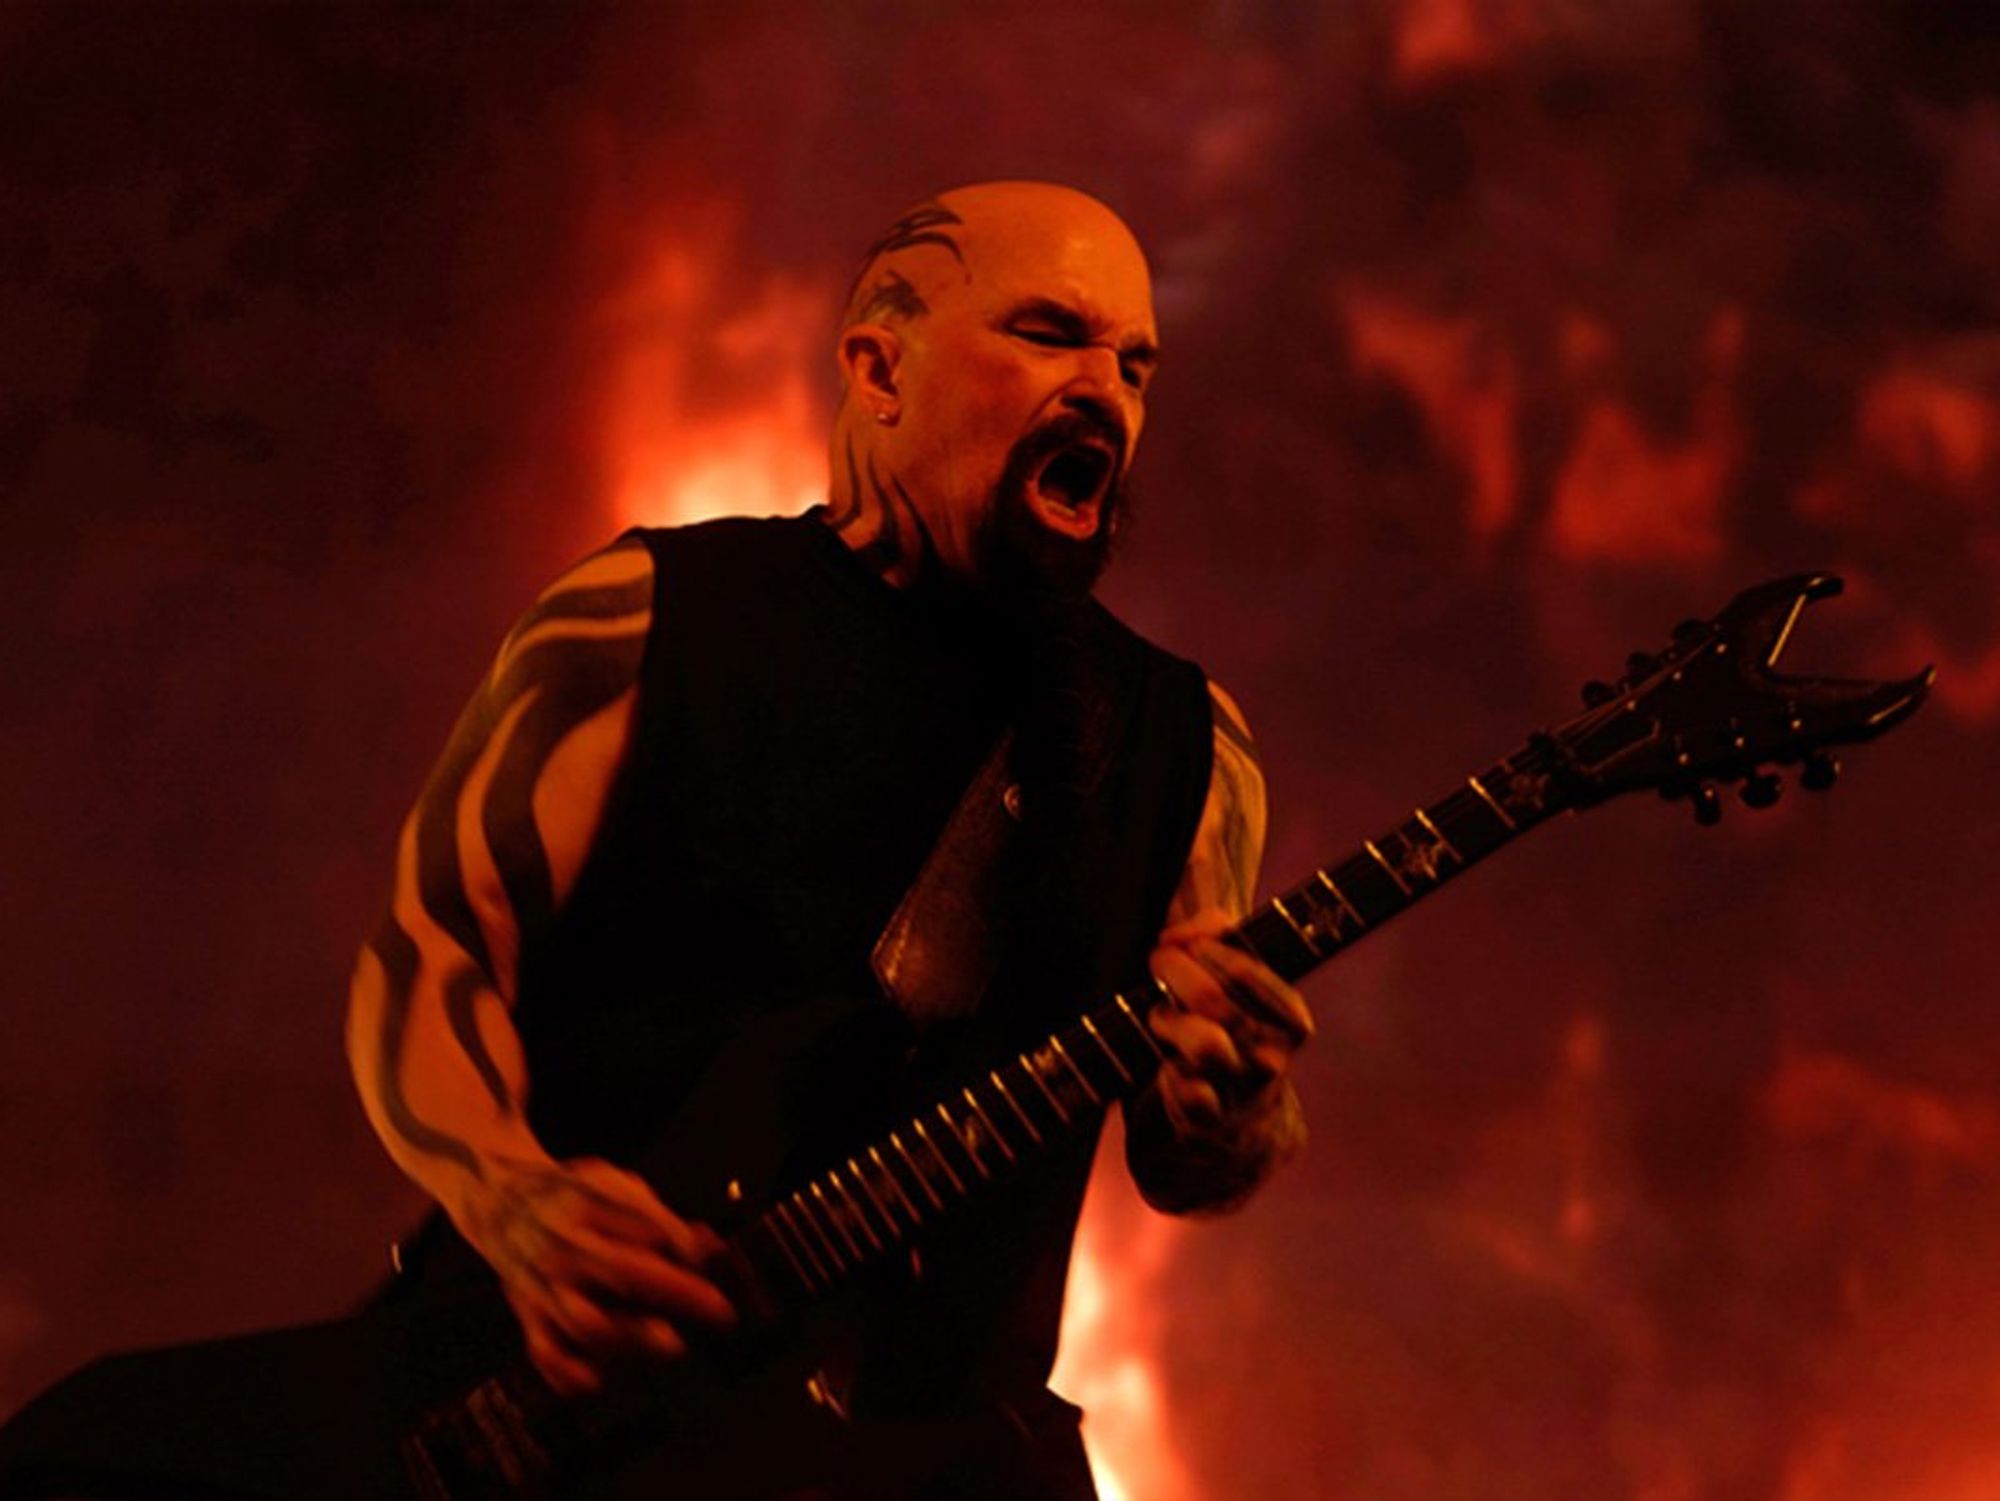 Kerry King Announces New Single